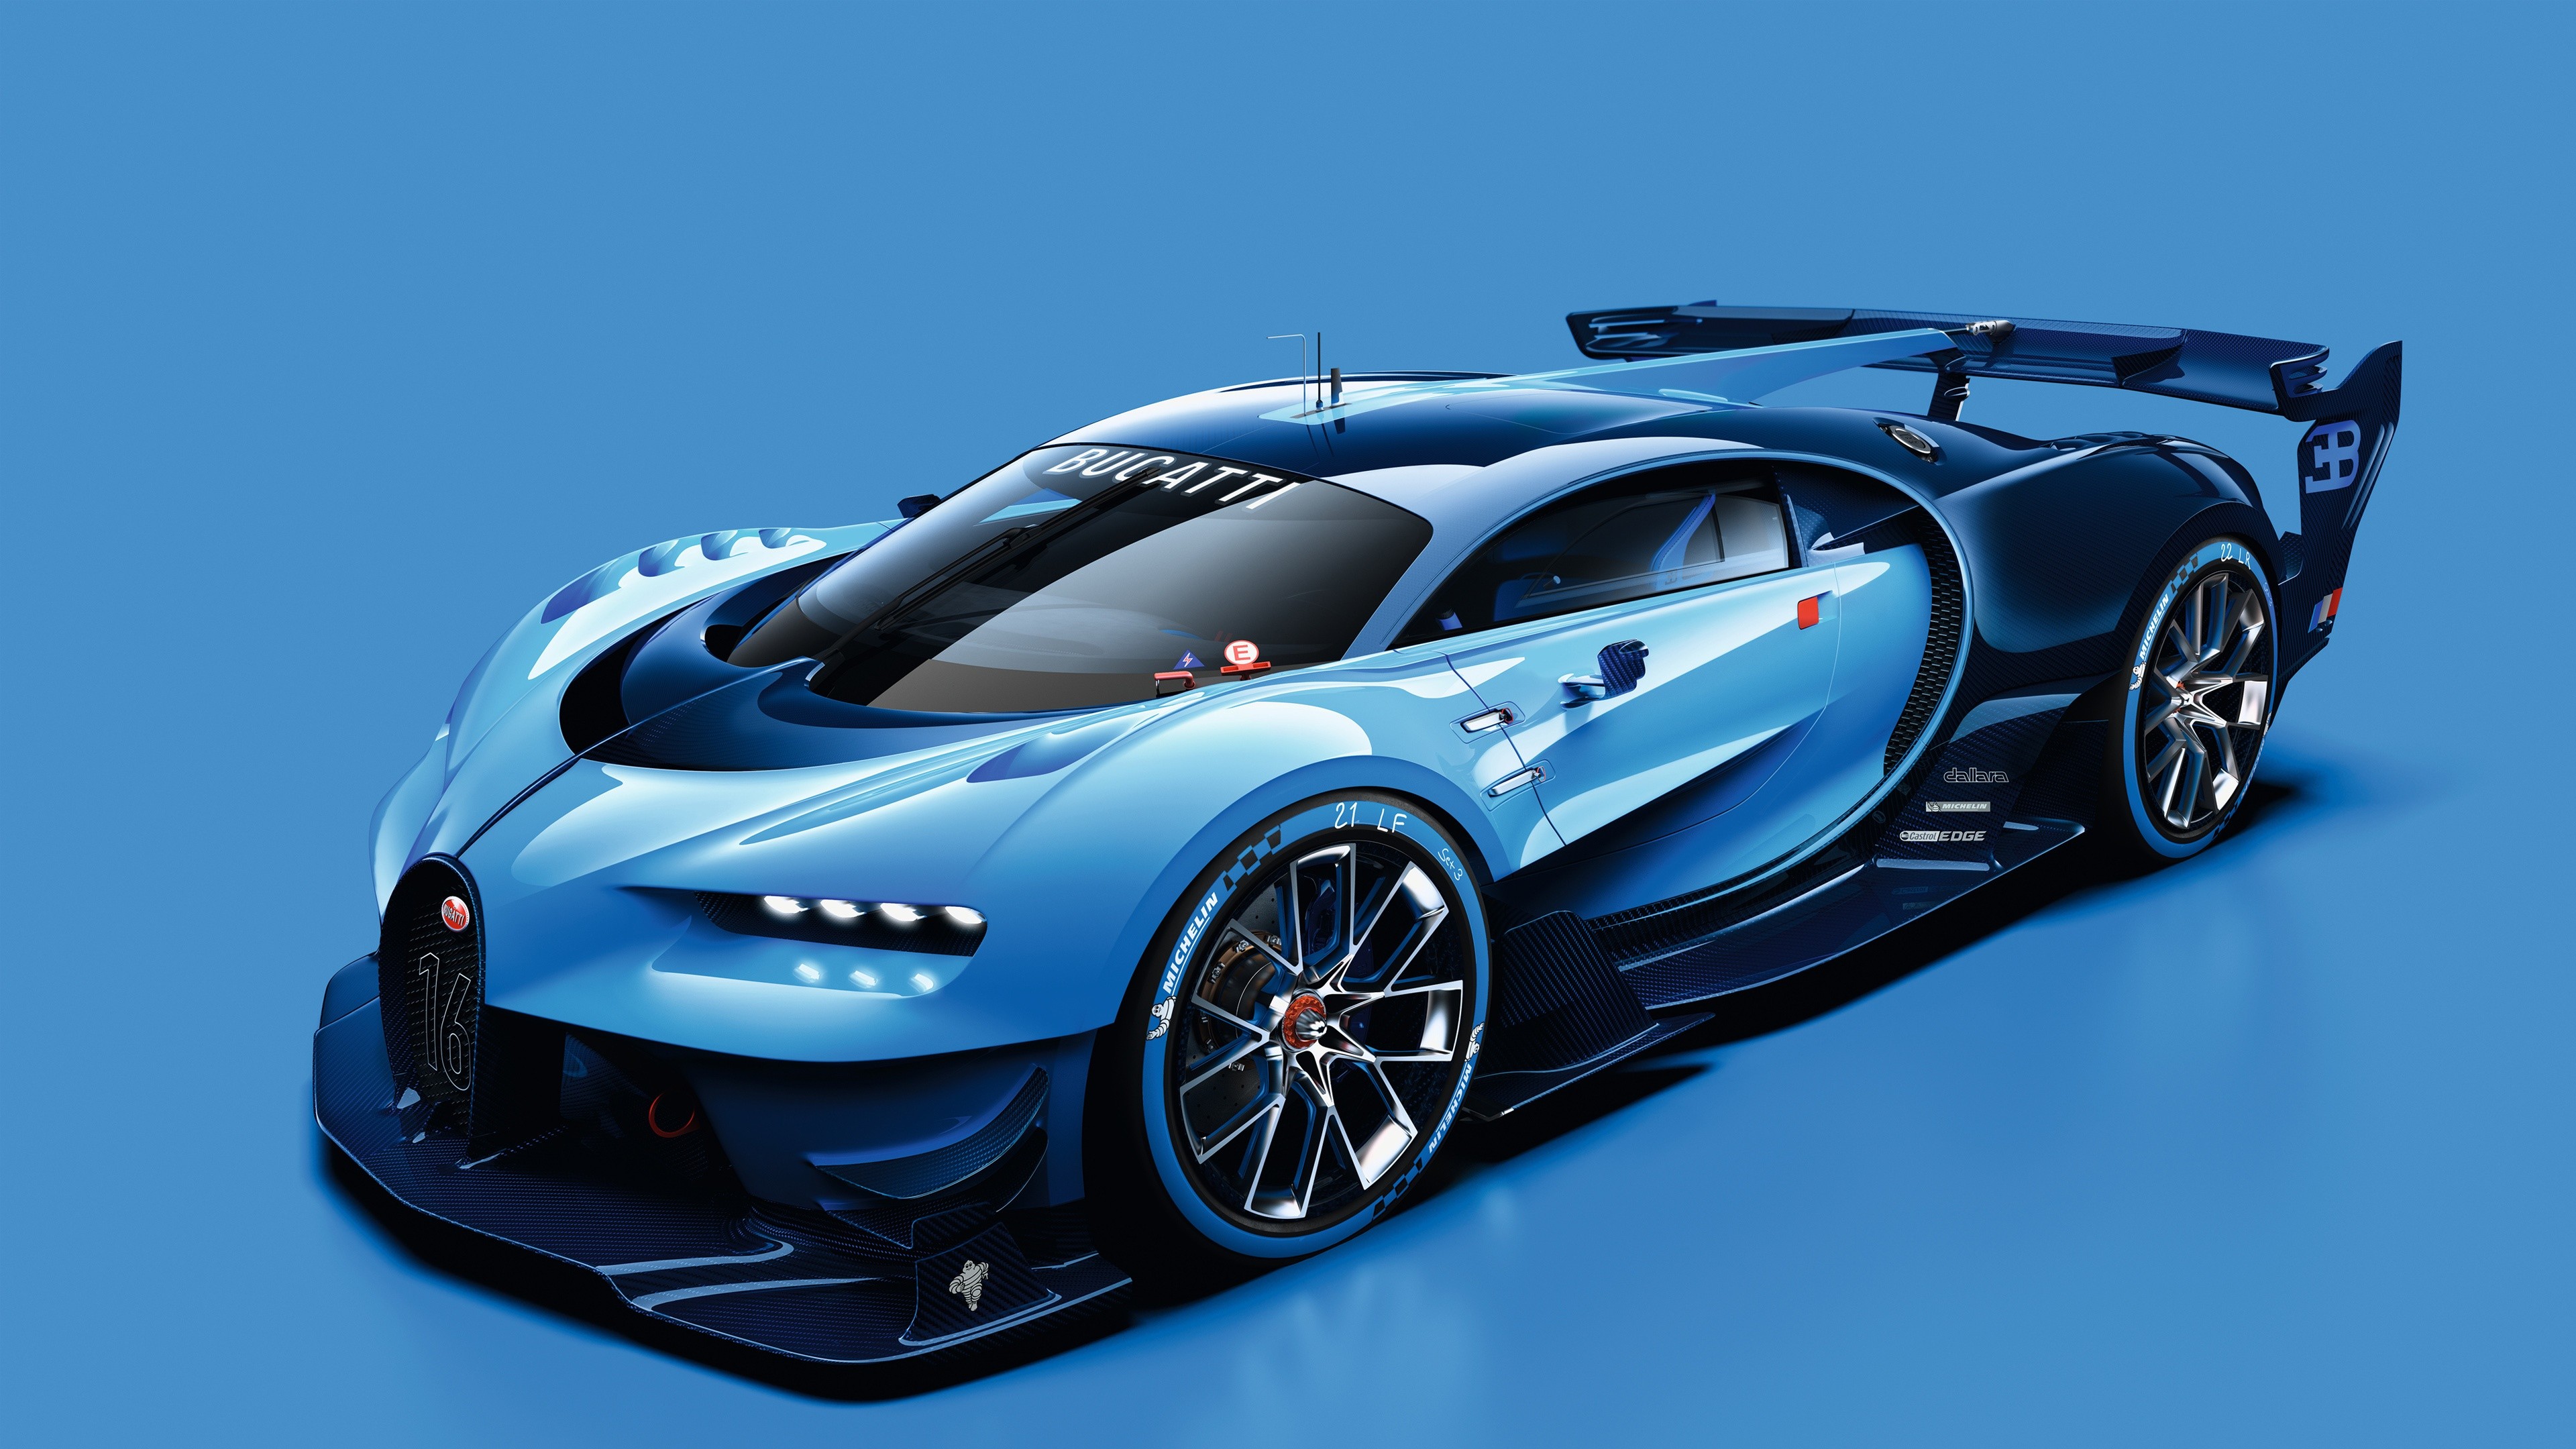 General 3840x2160 Bugatti Vision Gran Turismo Vision Gran Turismo concept cars car vehicle frontal view Hypercar Bugatti French Cars Volkswagen Group headlights simple background blue background